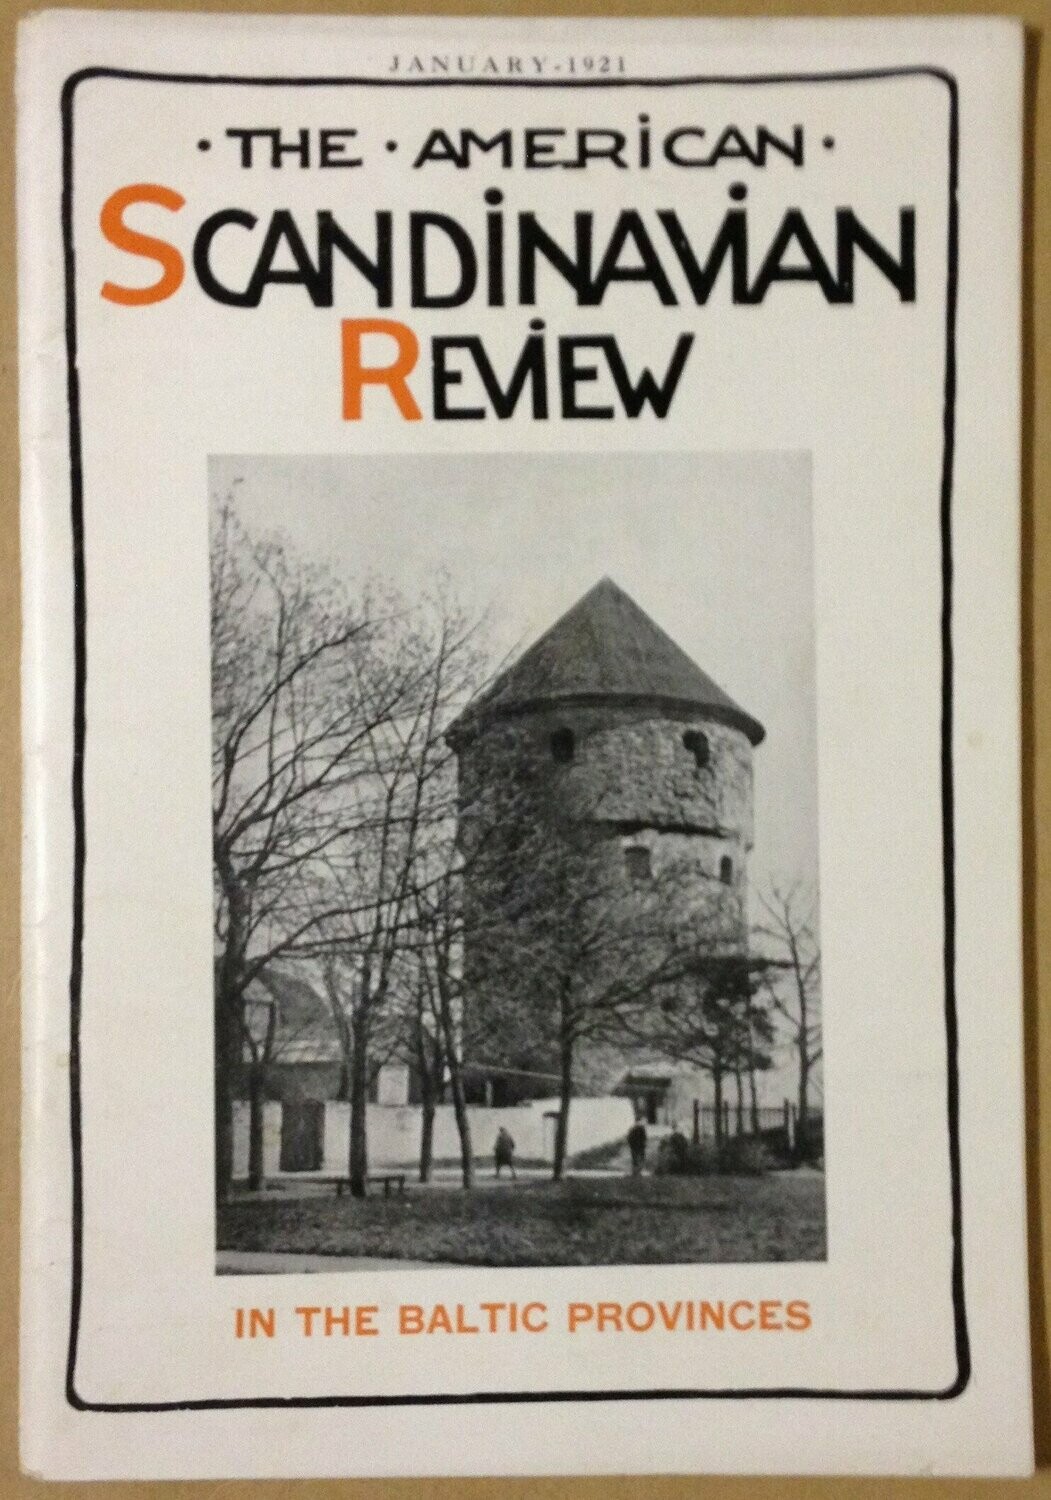 The American Scandinavian Review - In the Baltic provinces